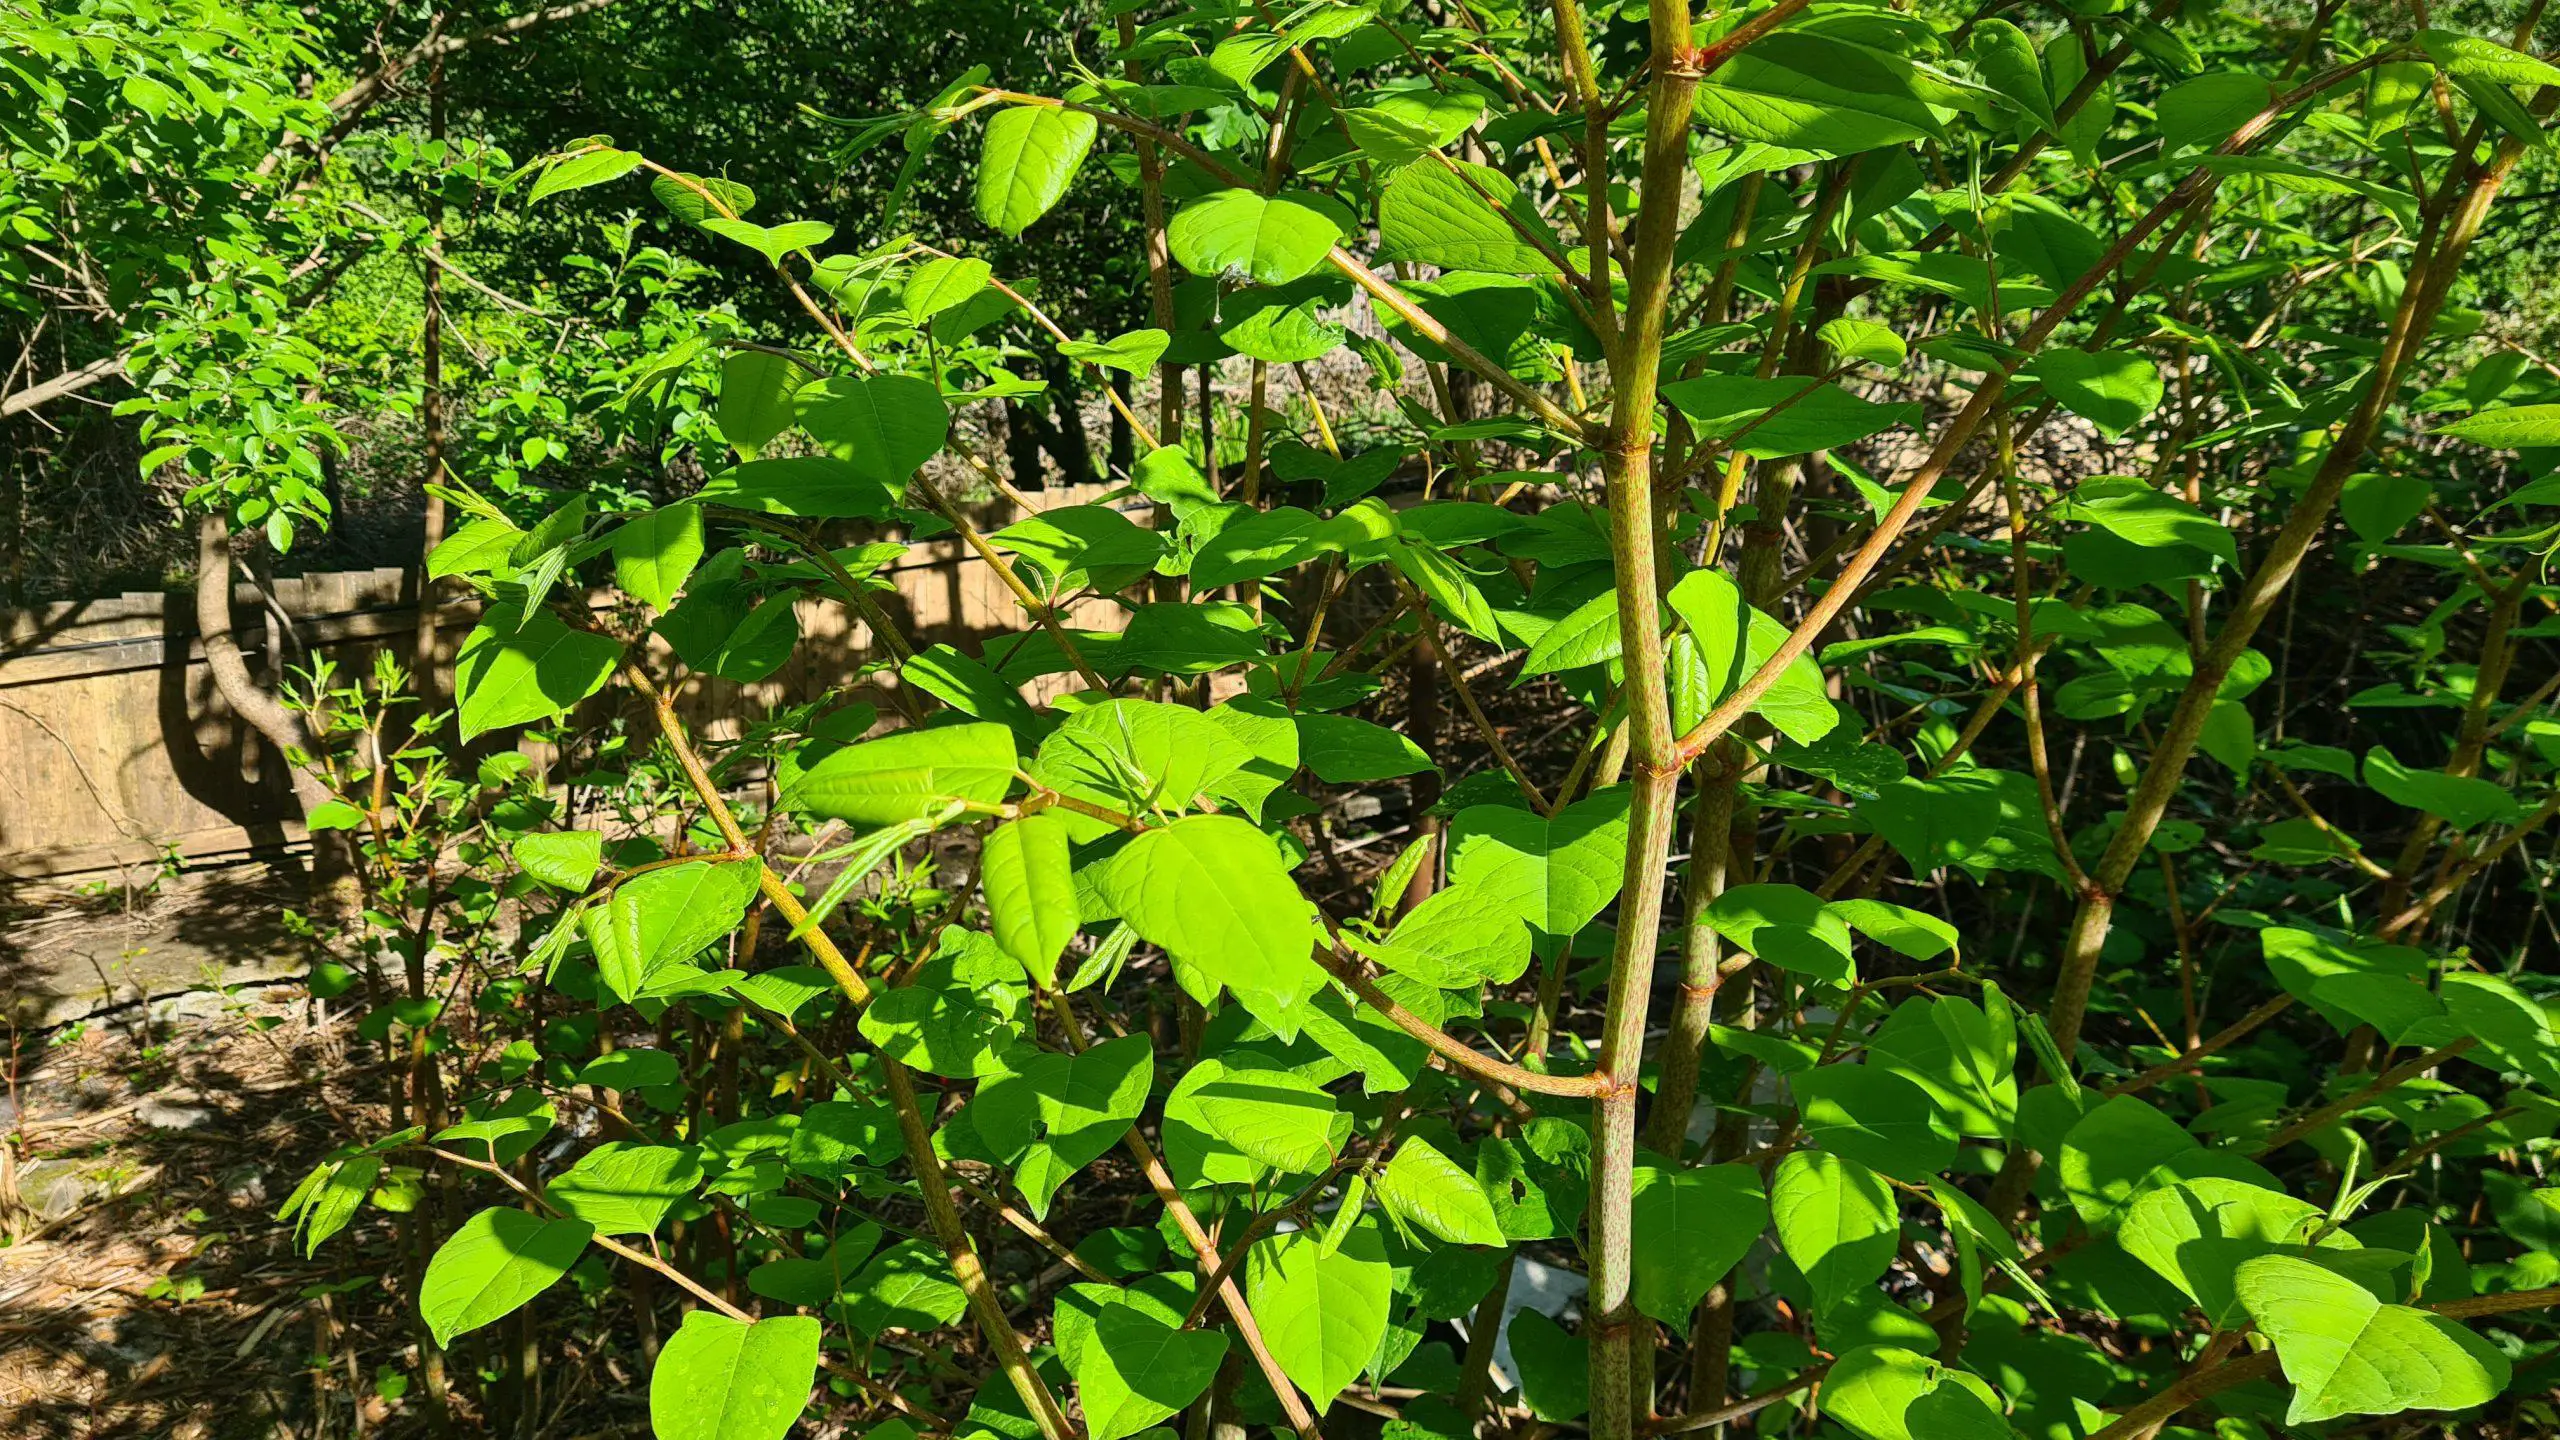 Growth chart of Japanese knotweed spread within the UK and how much of problem it is scaled